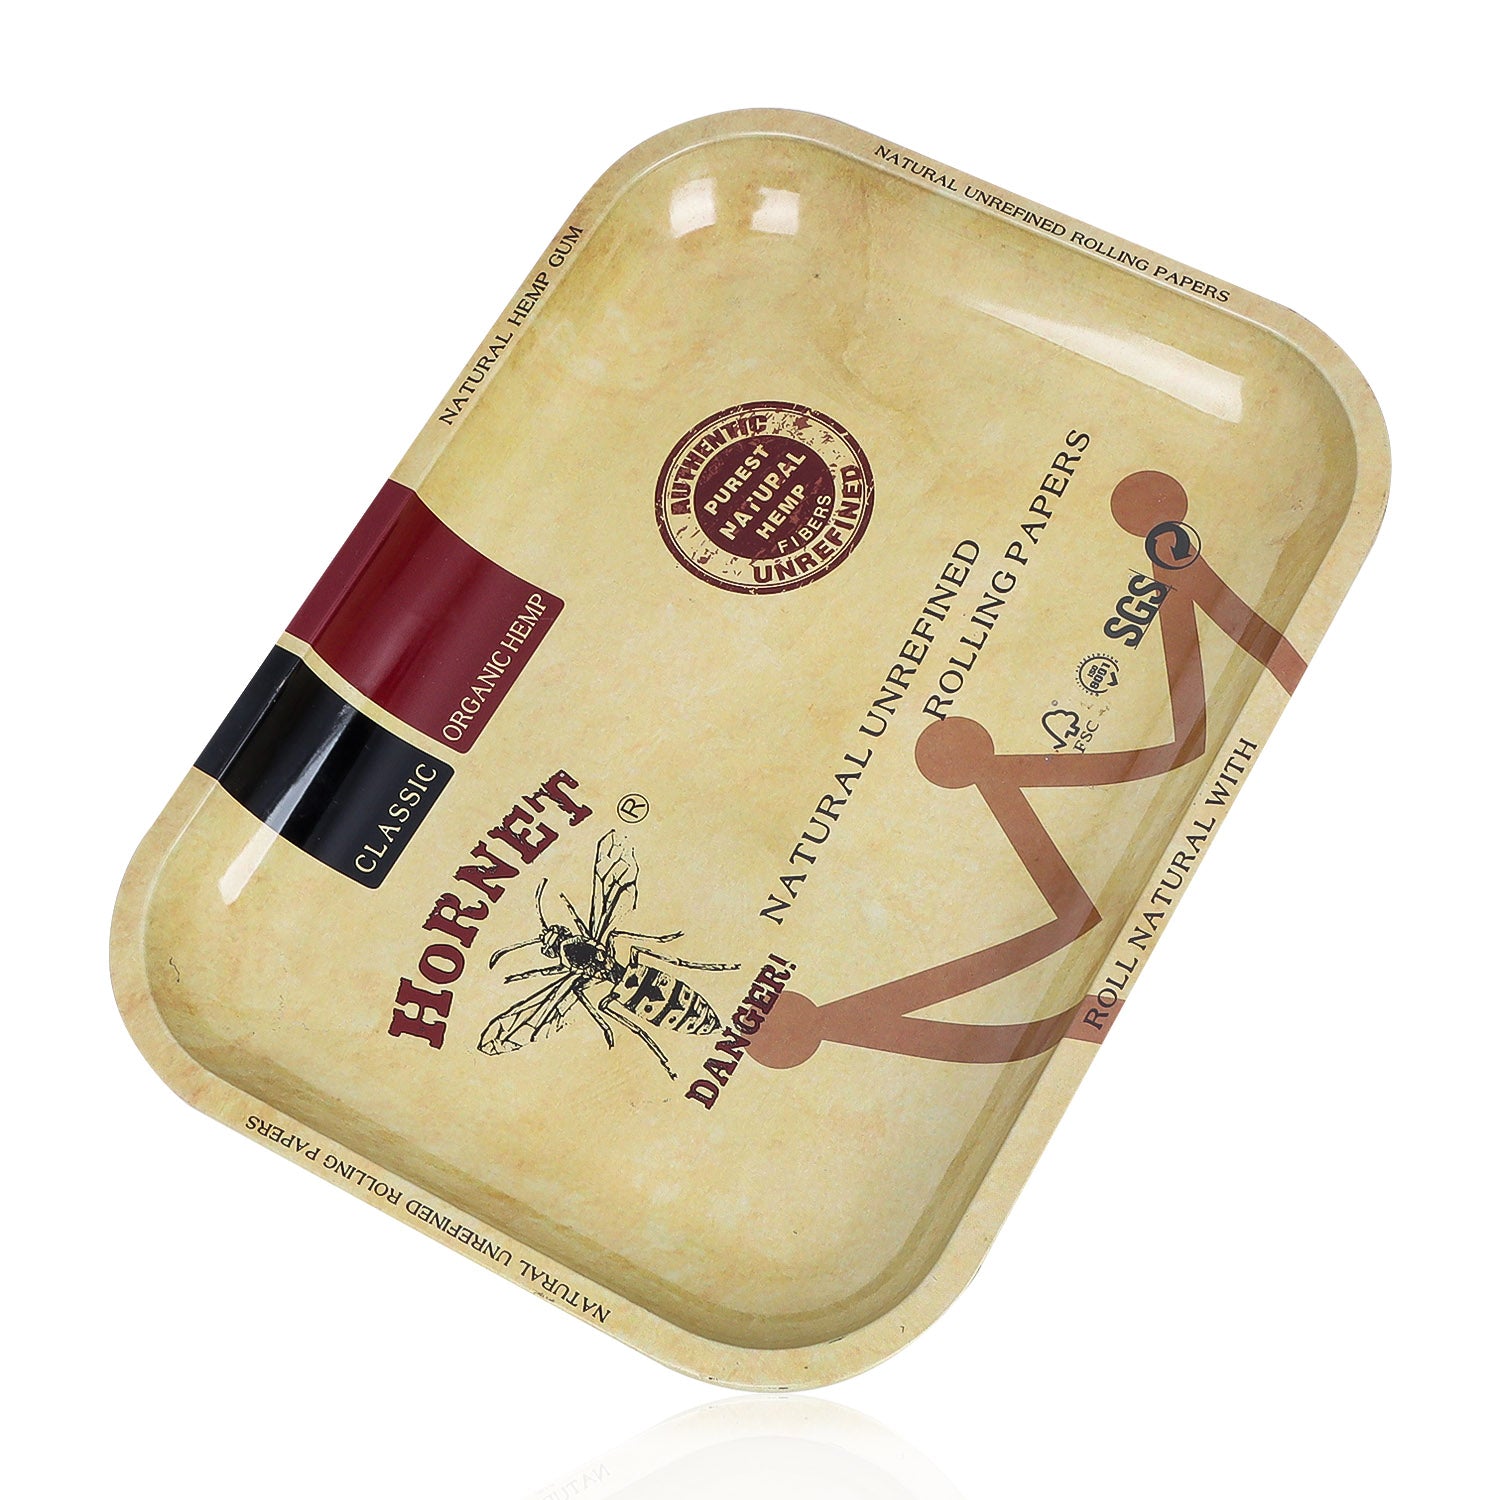 HORNET Tinplate Rolling Tray, 12” x 8.8” Cigarette Rolling Tray, Smooth Rounded Edge Rolling Paper Tray